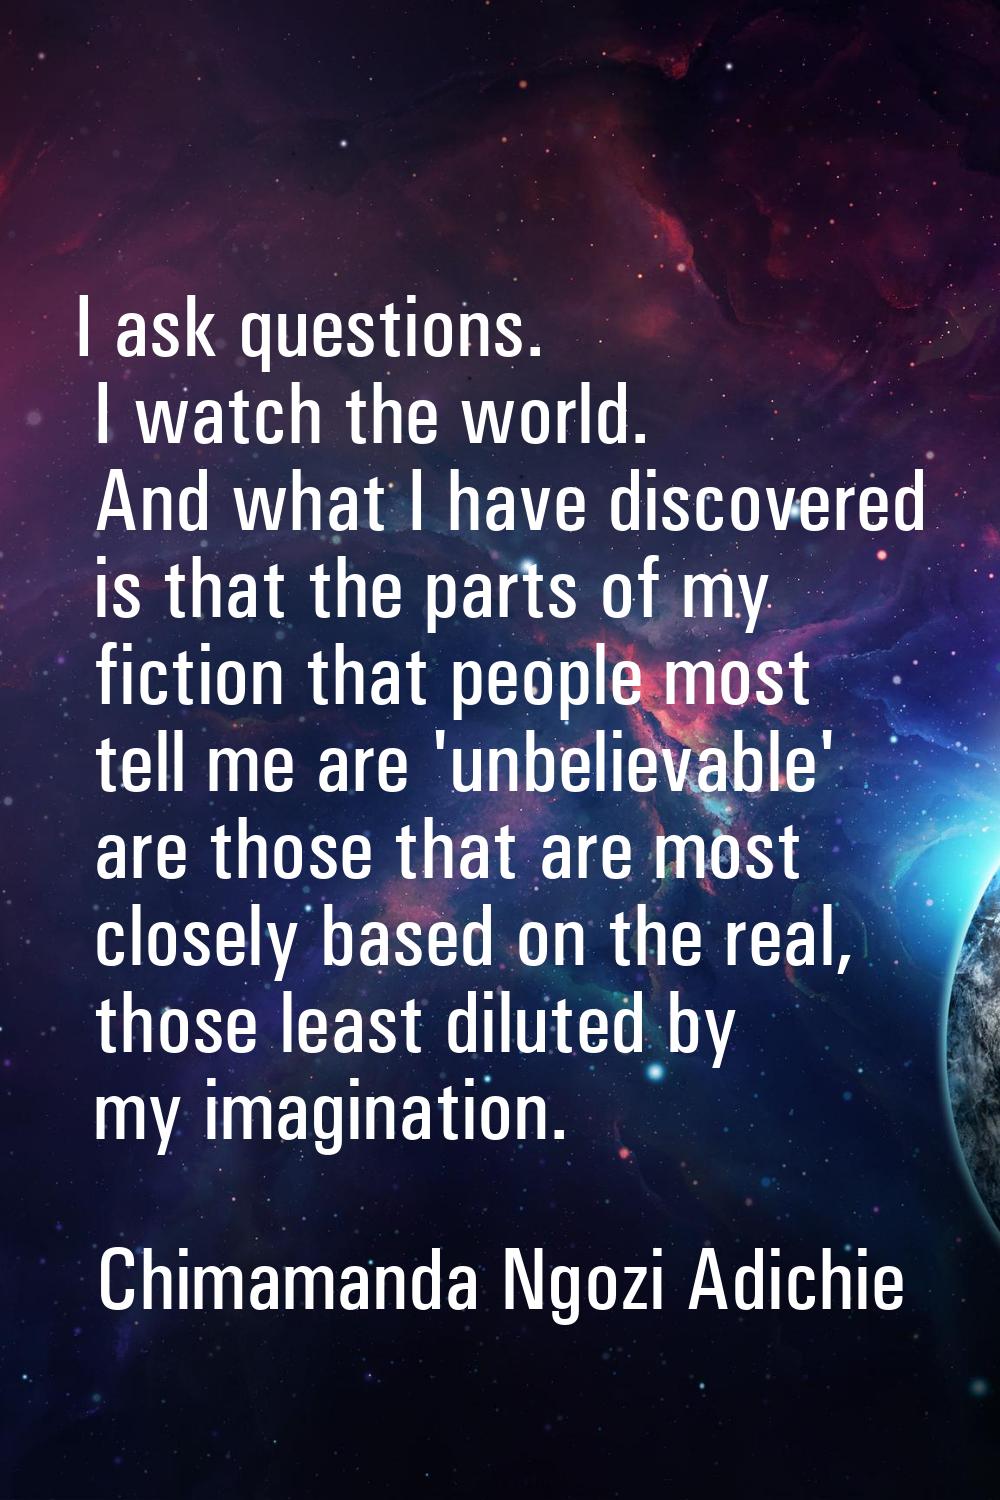 I ask questions. I watch the world. And what I have discovered is that the parts of my fiction that